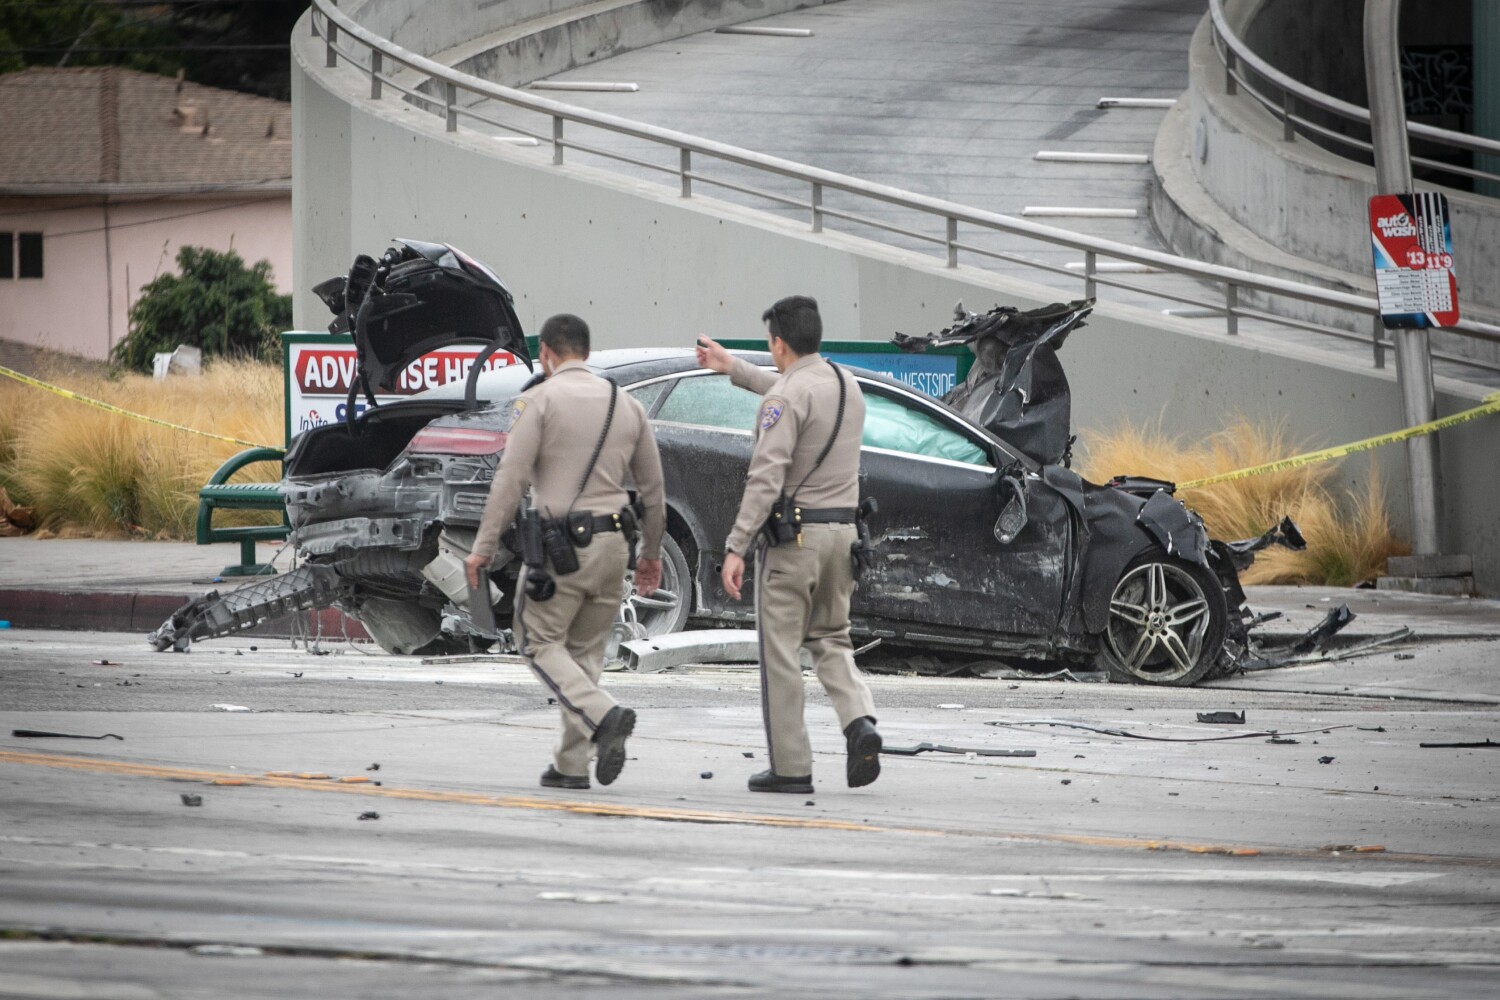 Mystery over Mercedes driver's movements, mind-set, medications at center of deadly crash probe